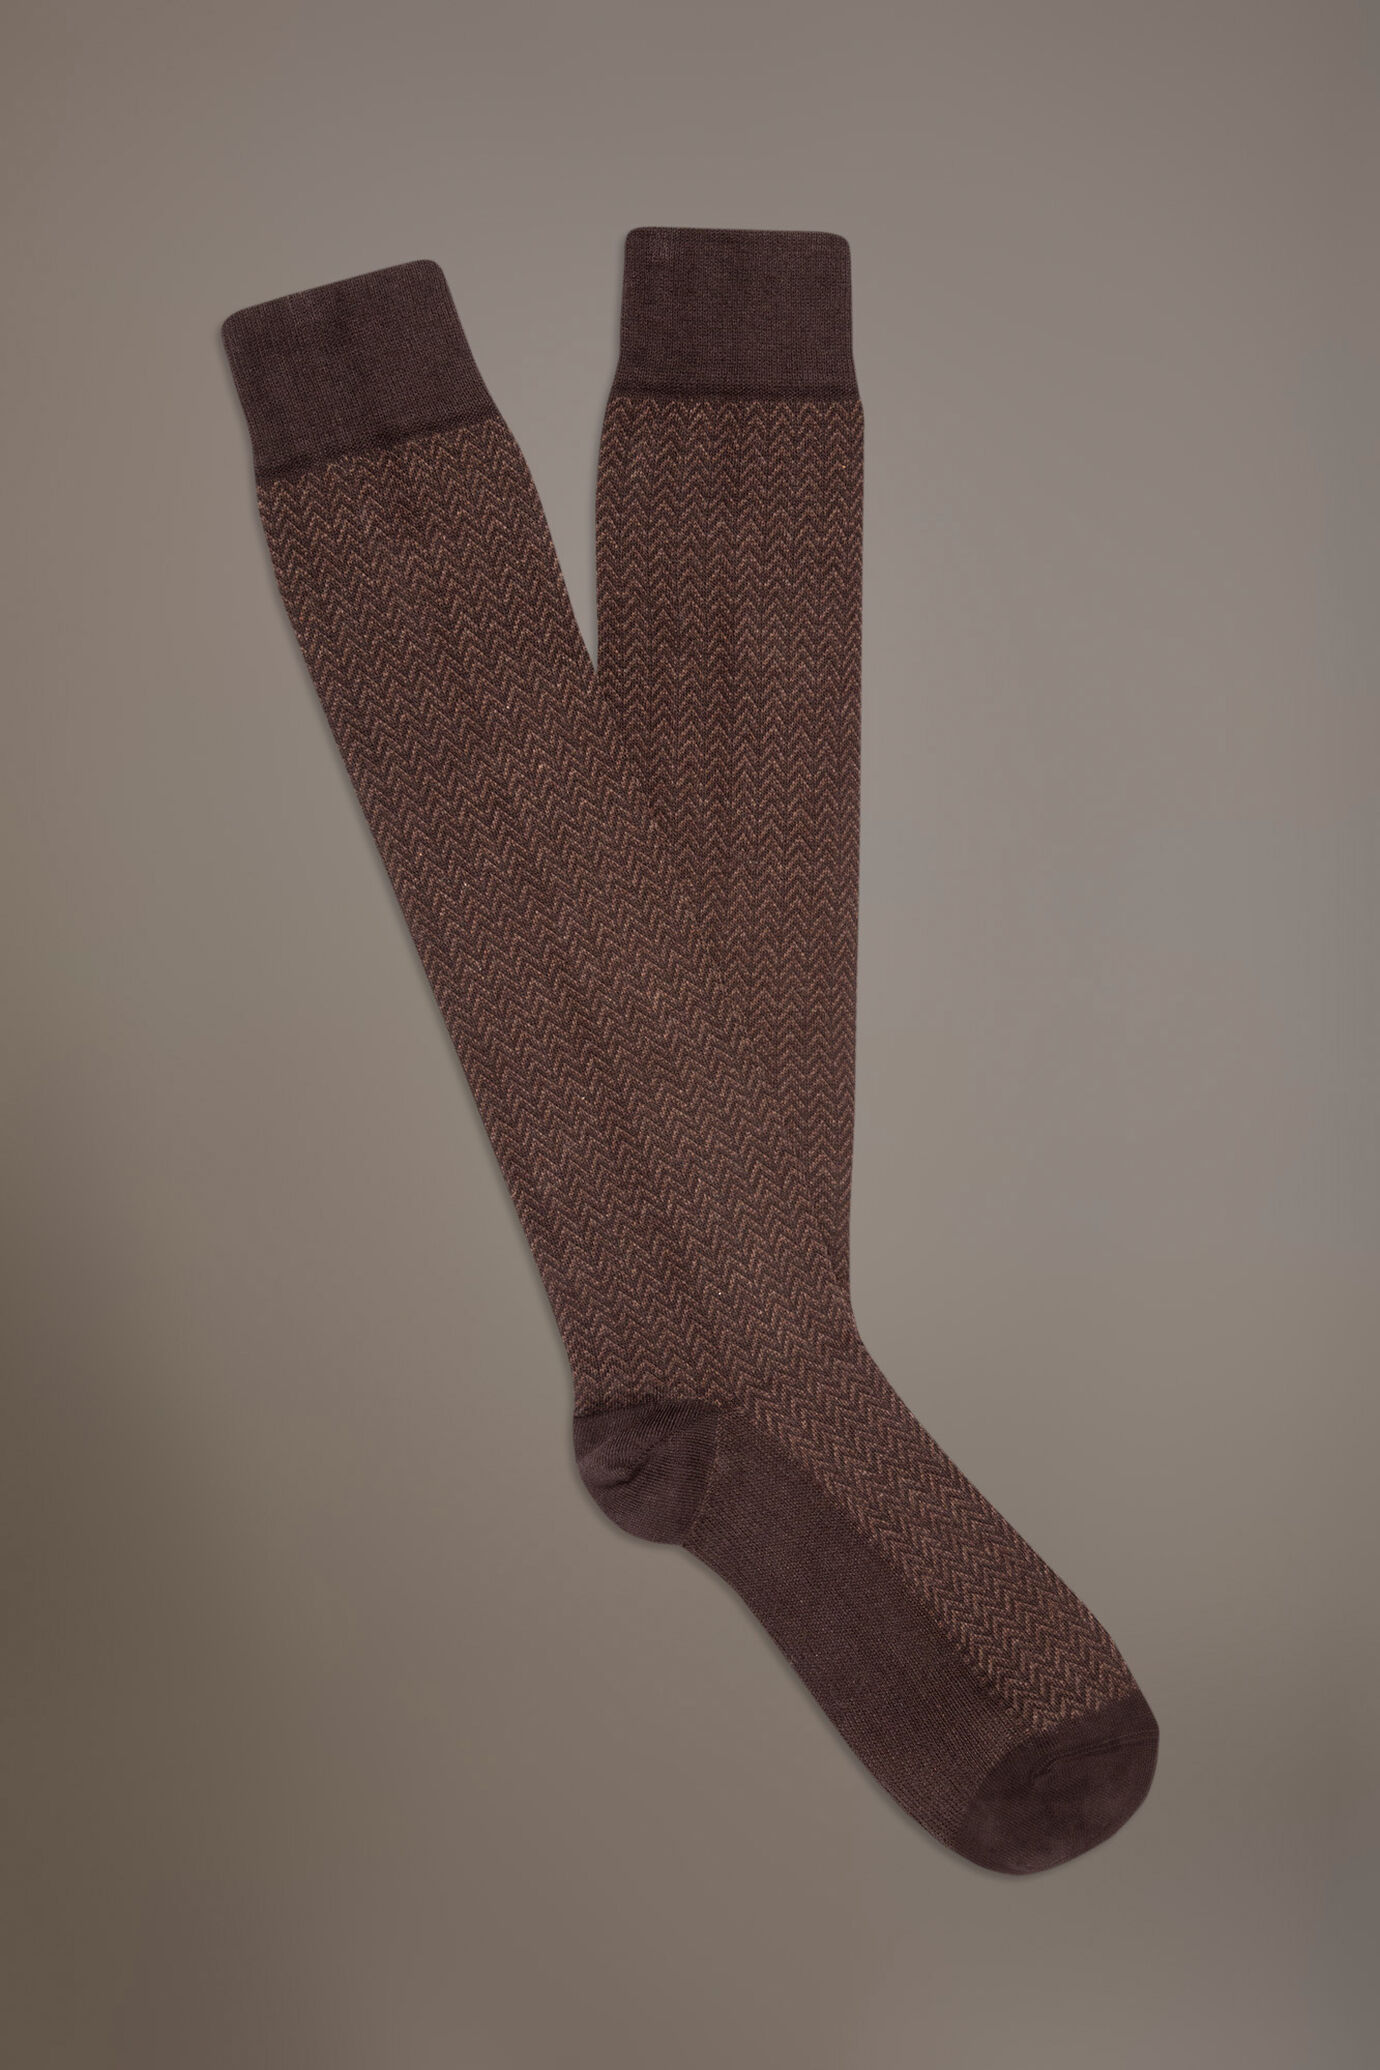 Long socks in stockinette stitch made in Italy